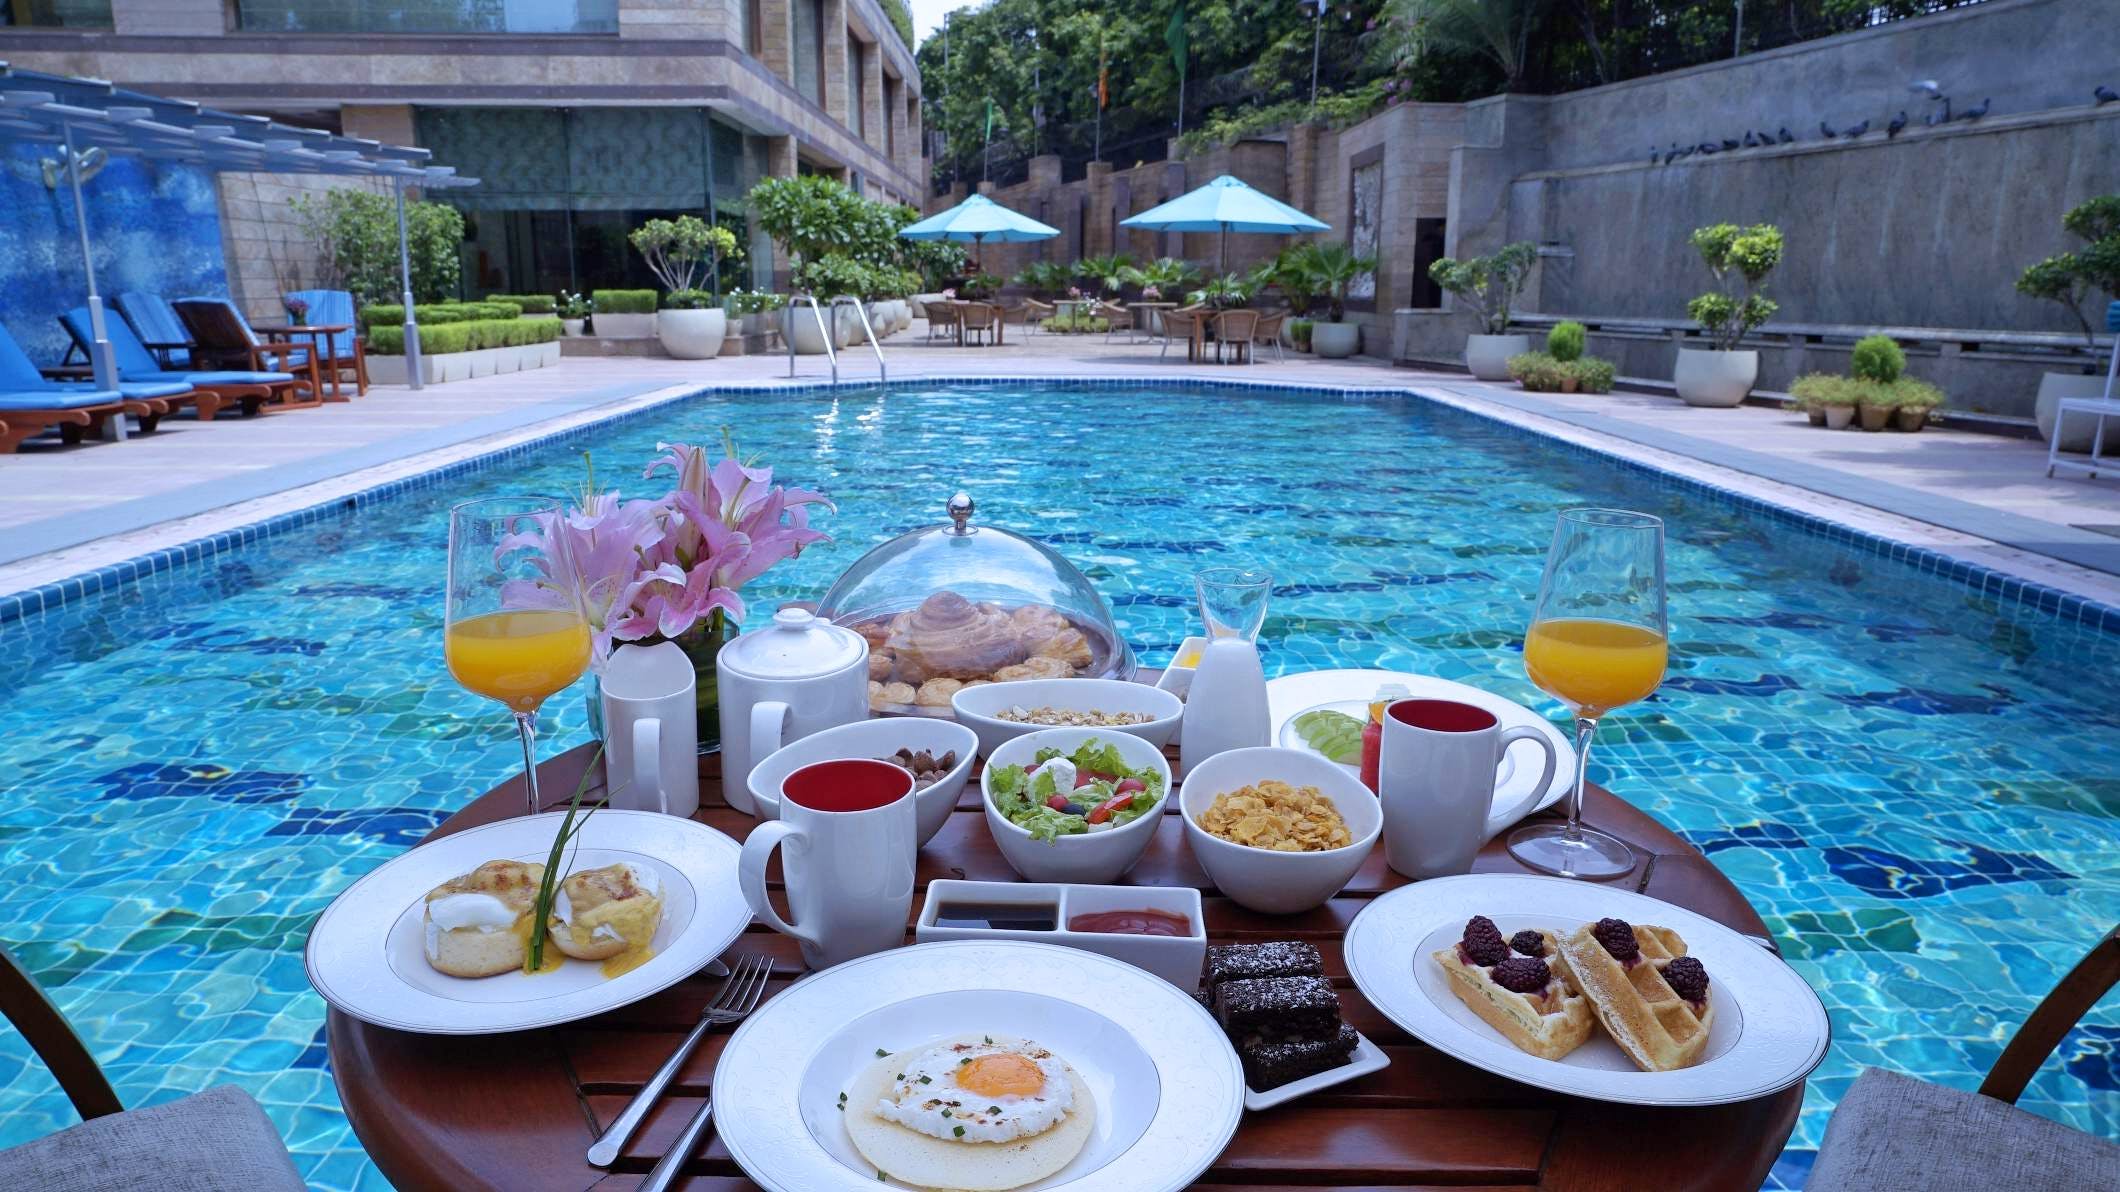 Meal,Brunch,Lunch,Breakfast,Dish,Swimming pool,Food,Resort,Vacation,Leisure